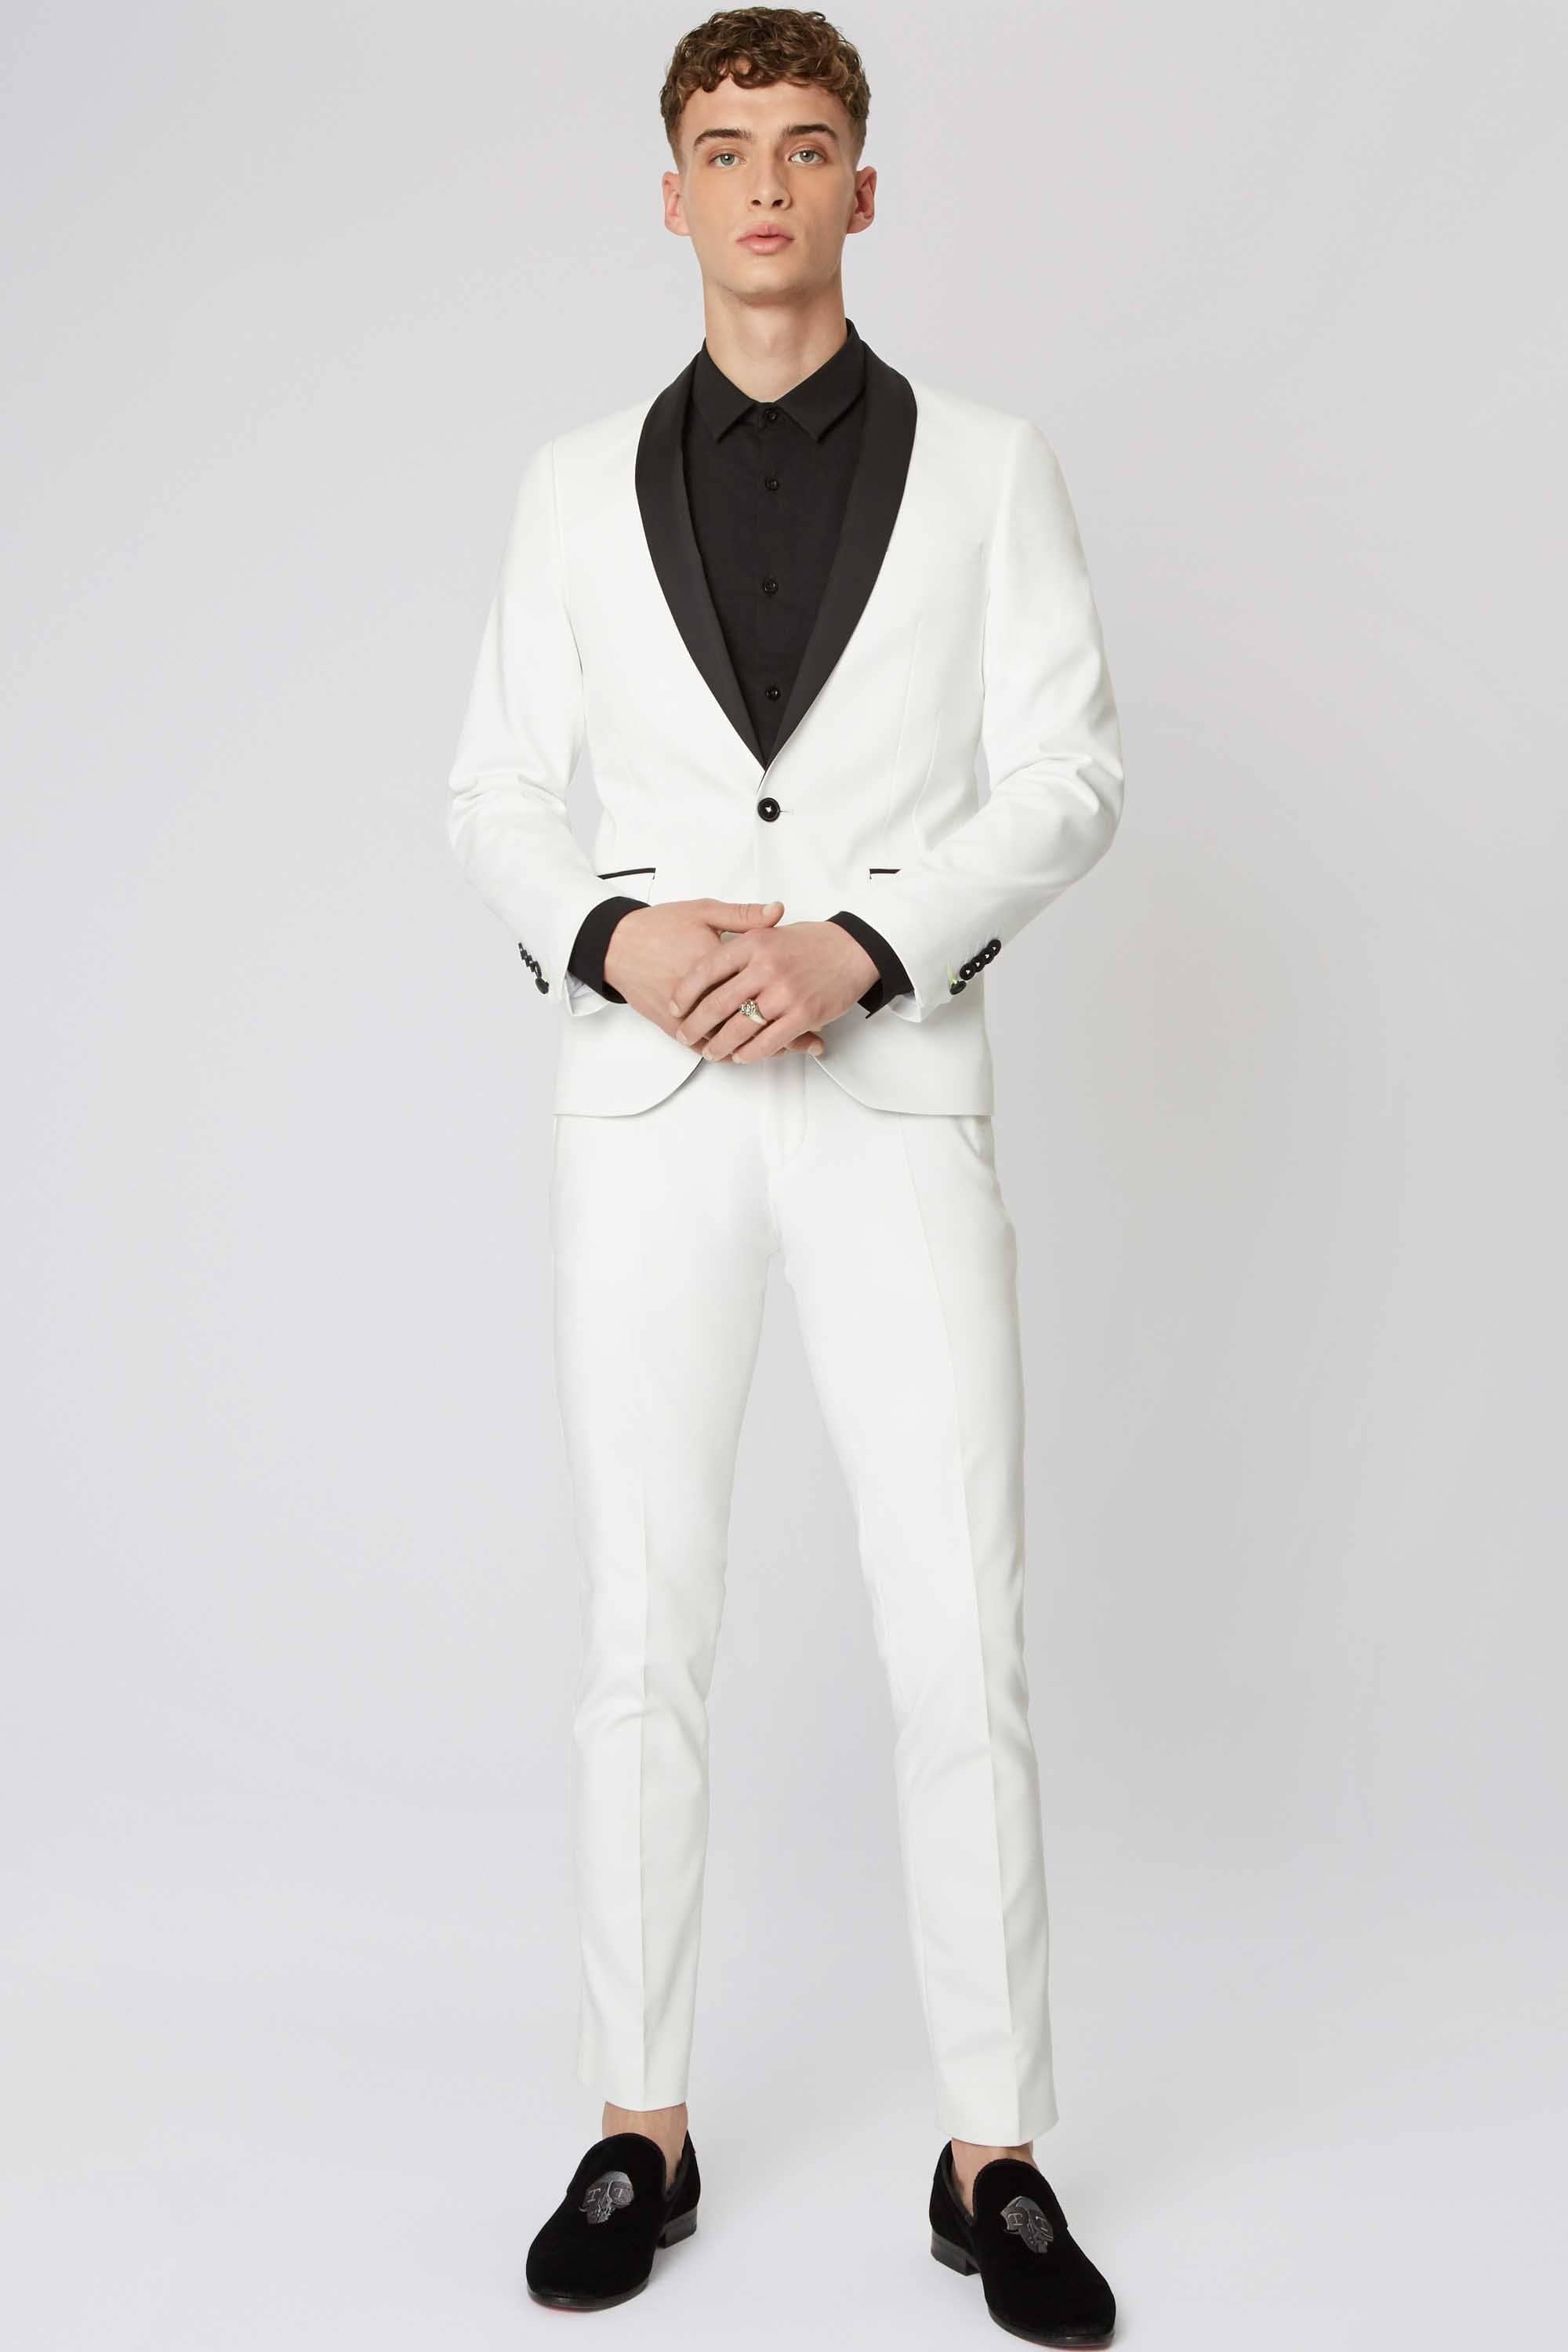 jcpenney The Savile Row Co The Savile Row Company White Tuxedo Pants Slim  Fit 39  jcpenney  Lookastic